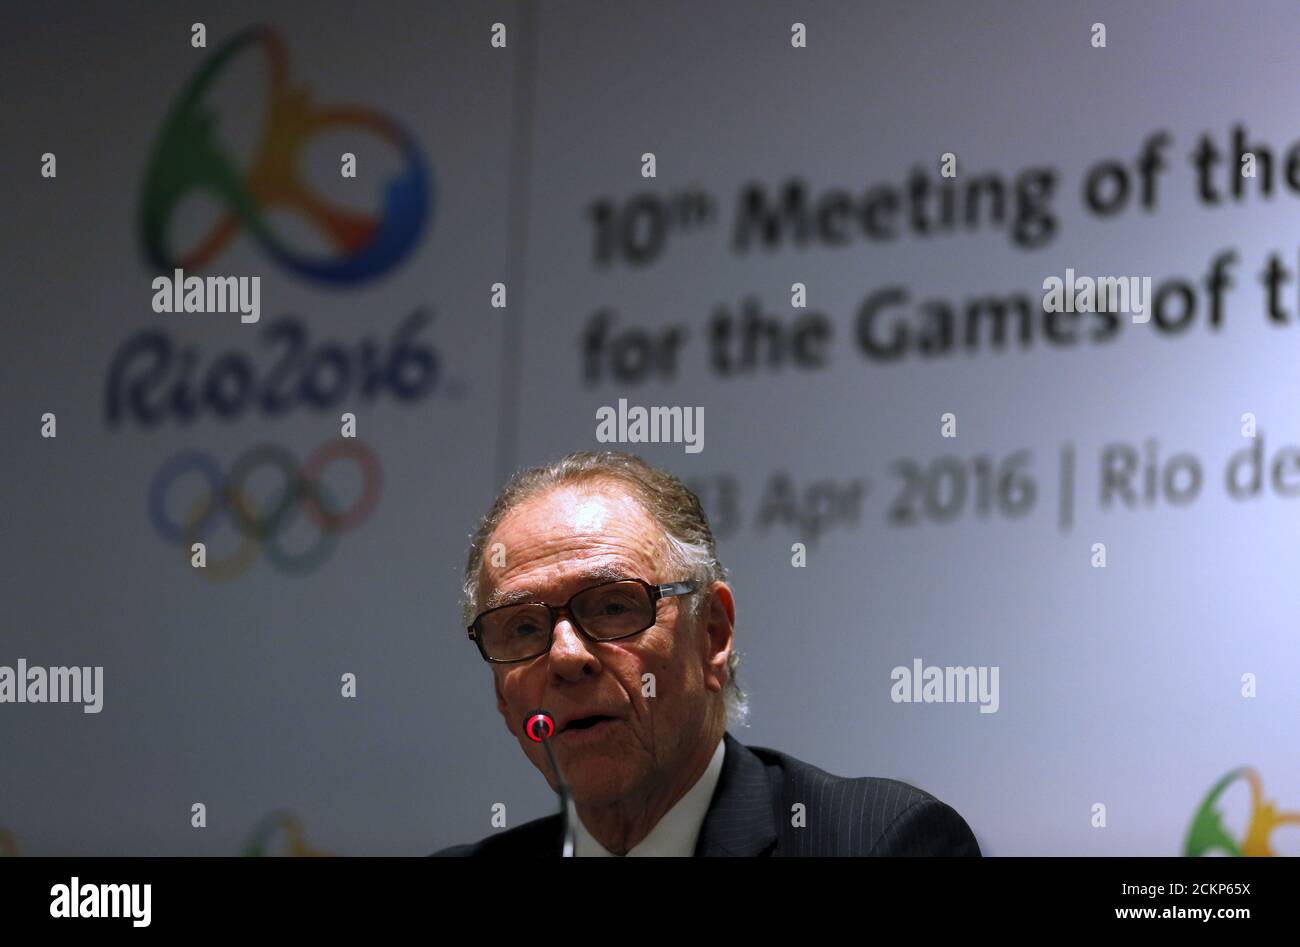 Rio 2016 Olympic Games Organising Committee President Carlos Arthur Nuzman speaks at a news conference during the IOC Coordination Commission's 10th visit to Rio de Janeiro, Brazil, April 13, 2016. REUTERS/Pilar Olivares Stock Photo